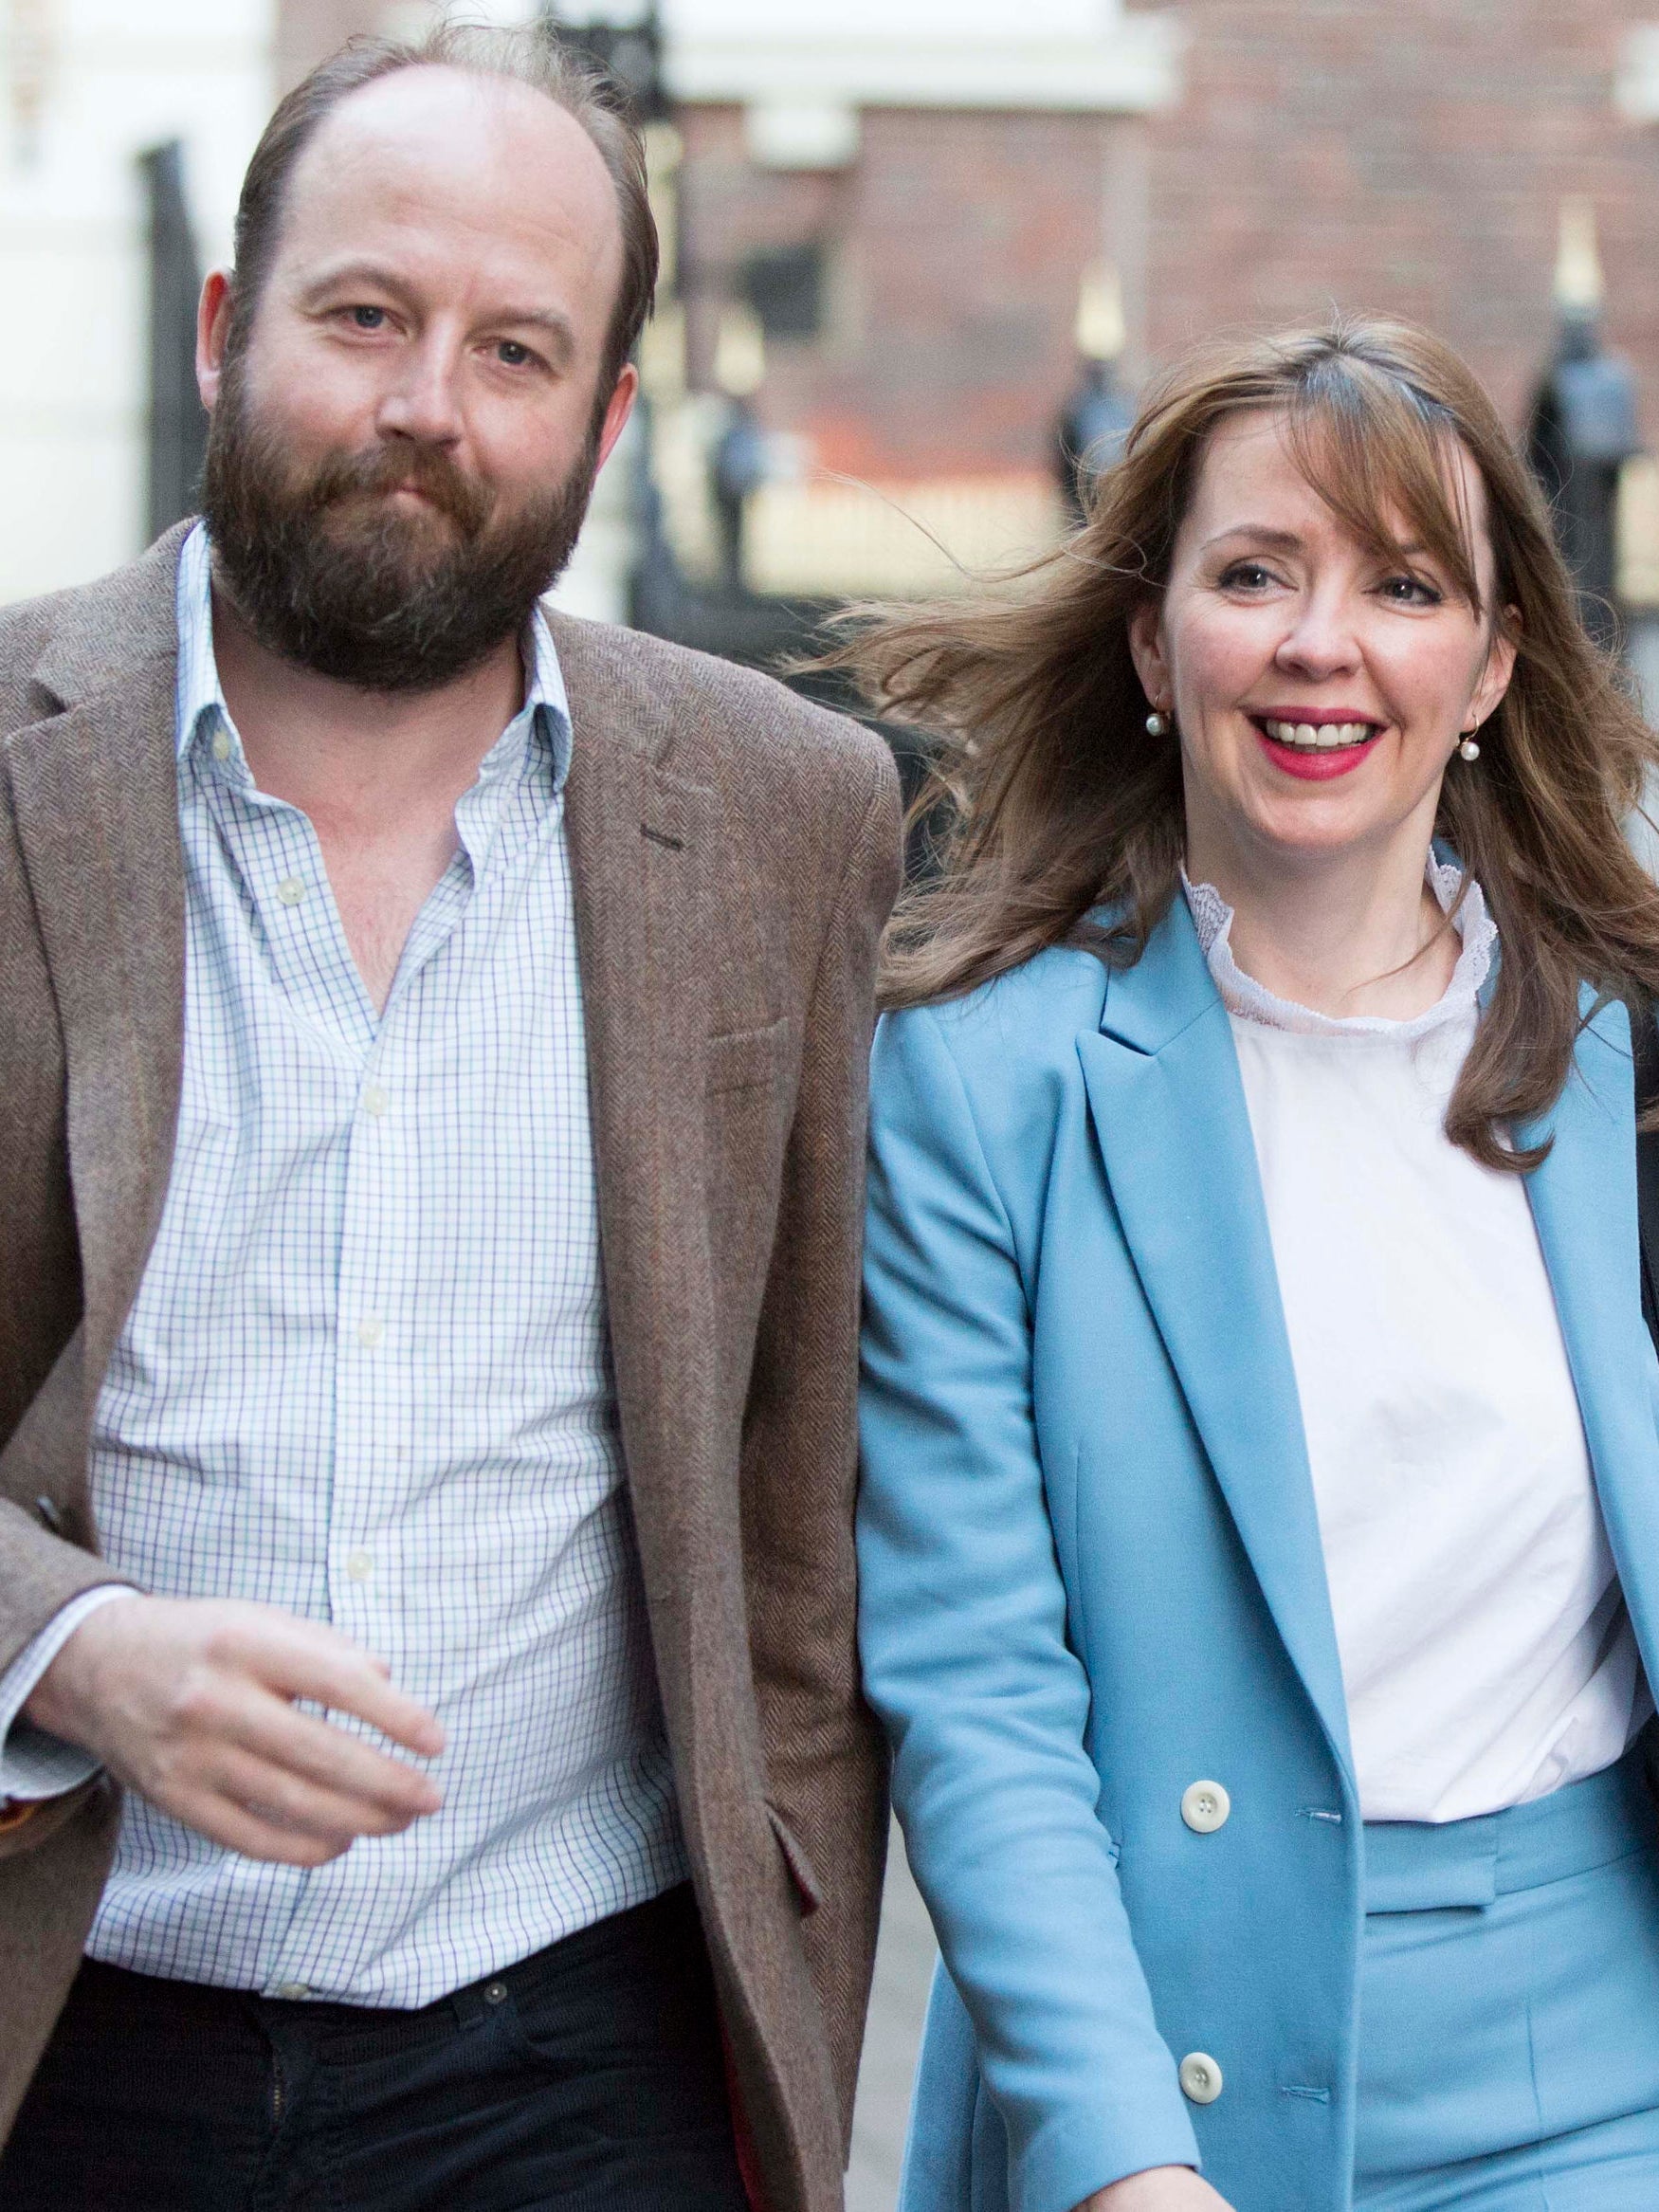 May’s joint chiefs of staff Nick Timothy and Fiona Hill